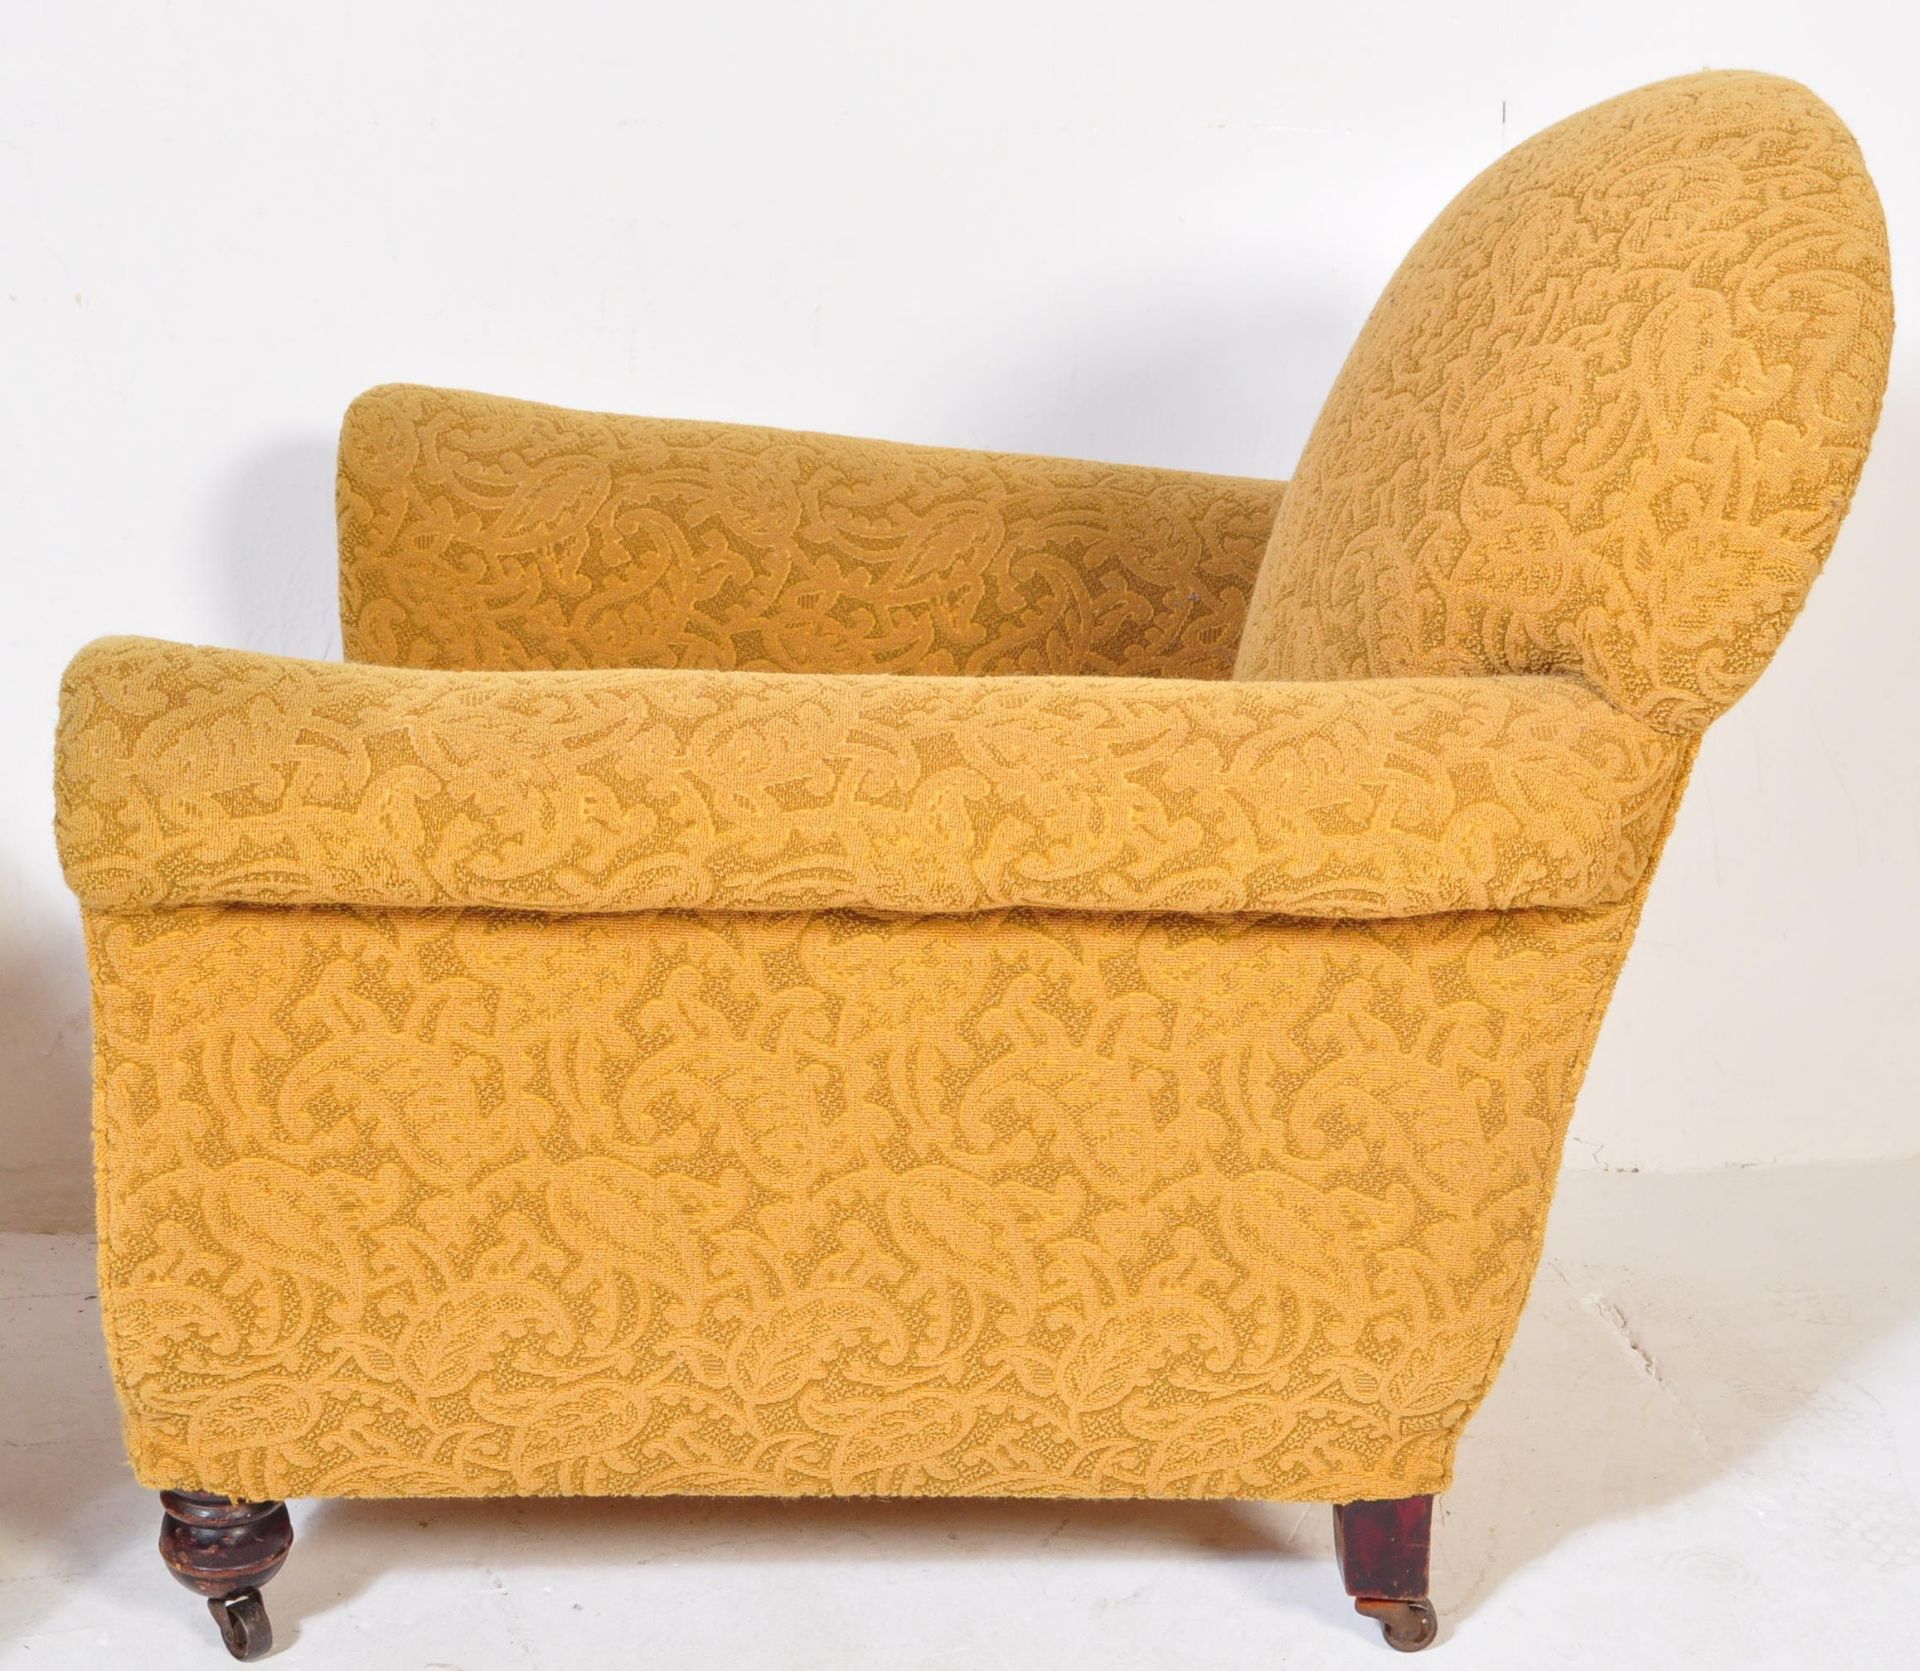 PAIR OF 19TH CENTURY HOWARD & SONS STYLE ARMCHAIRS - Image 5 of 5